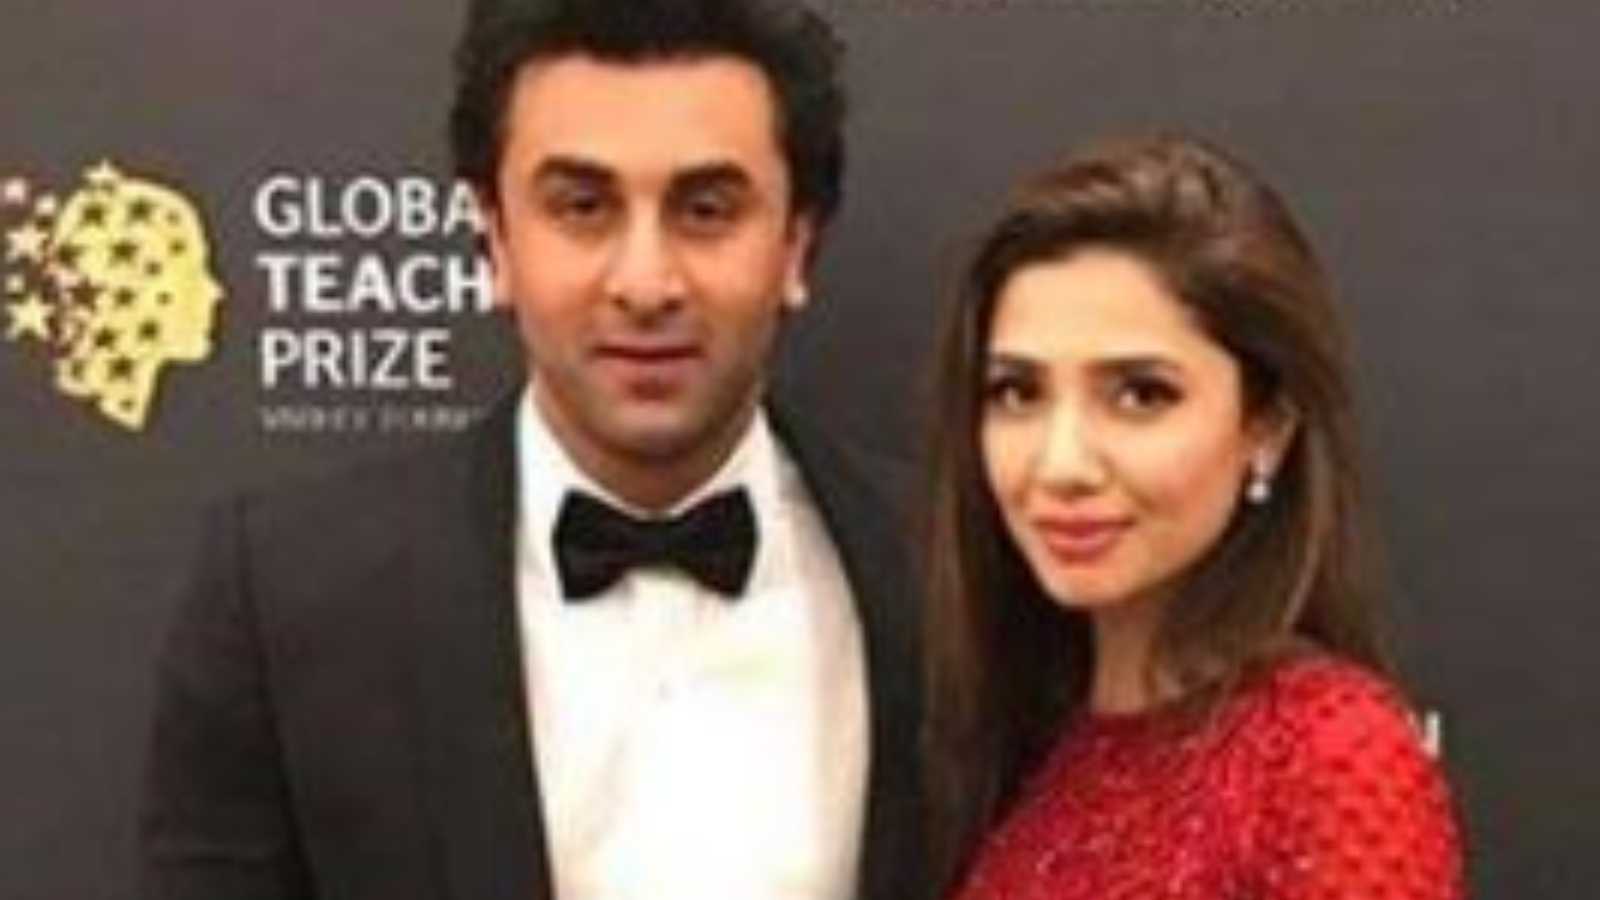 Ranbir Kapoor and Mahira Khan's viral pics weren’t the only evidence that the two actors dated, here's another